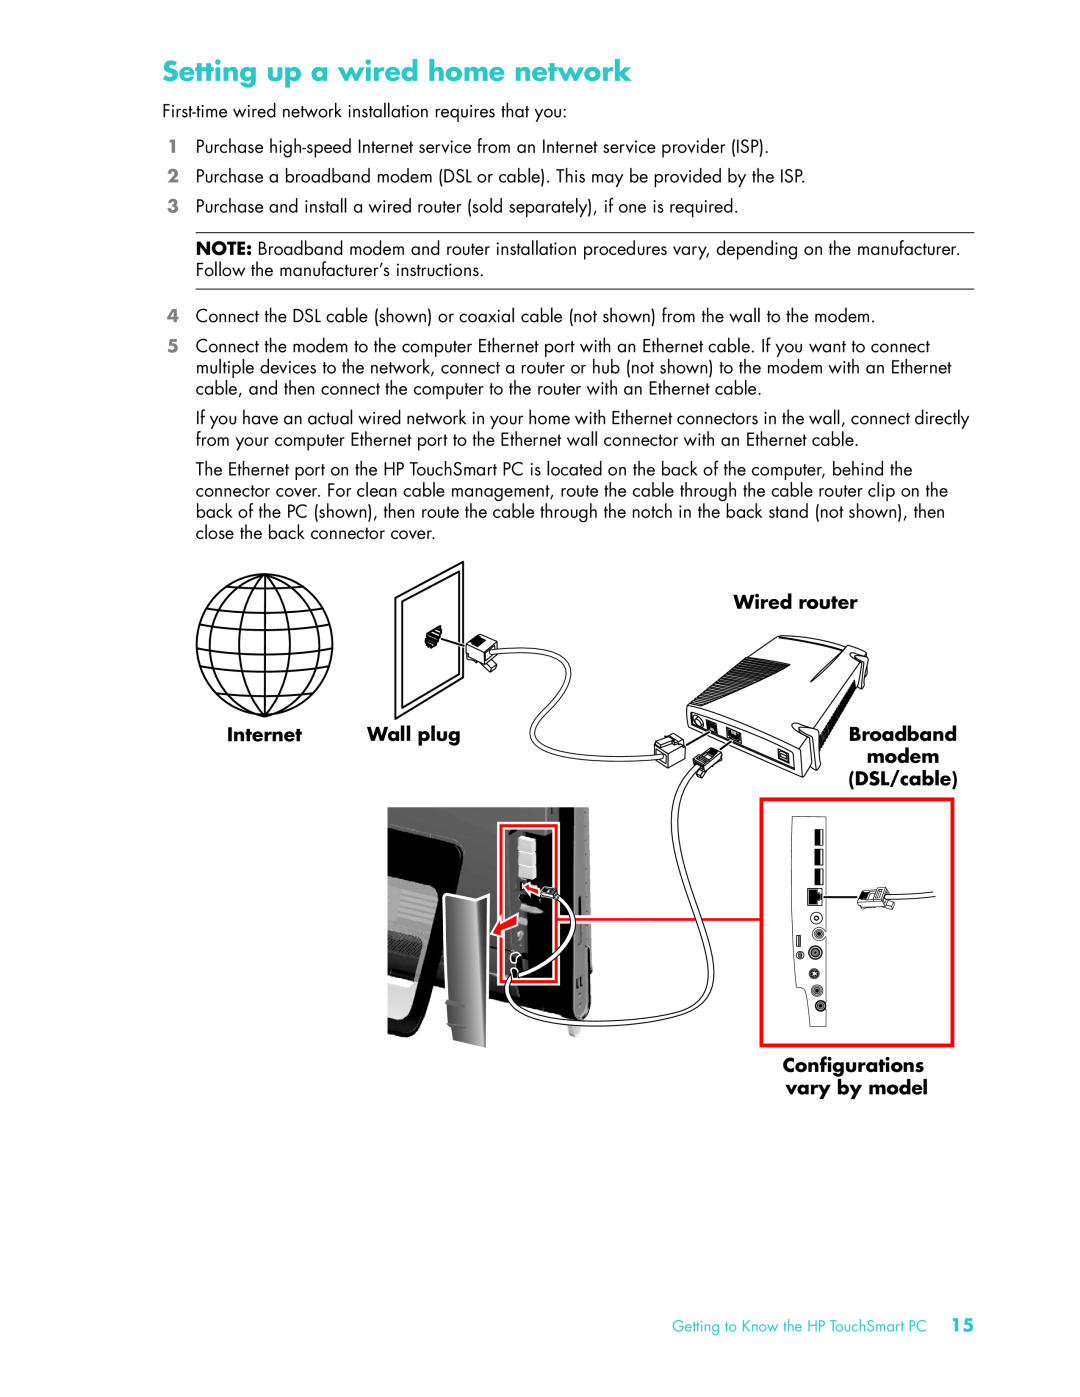 HP IQ504 KQ436AA-NOOS Setting up a wired home network, Wired router, Internet, Wall plug, Broadband, modem, DSL/cable 